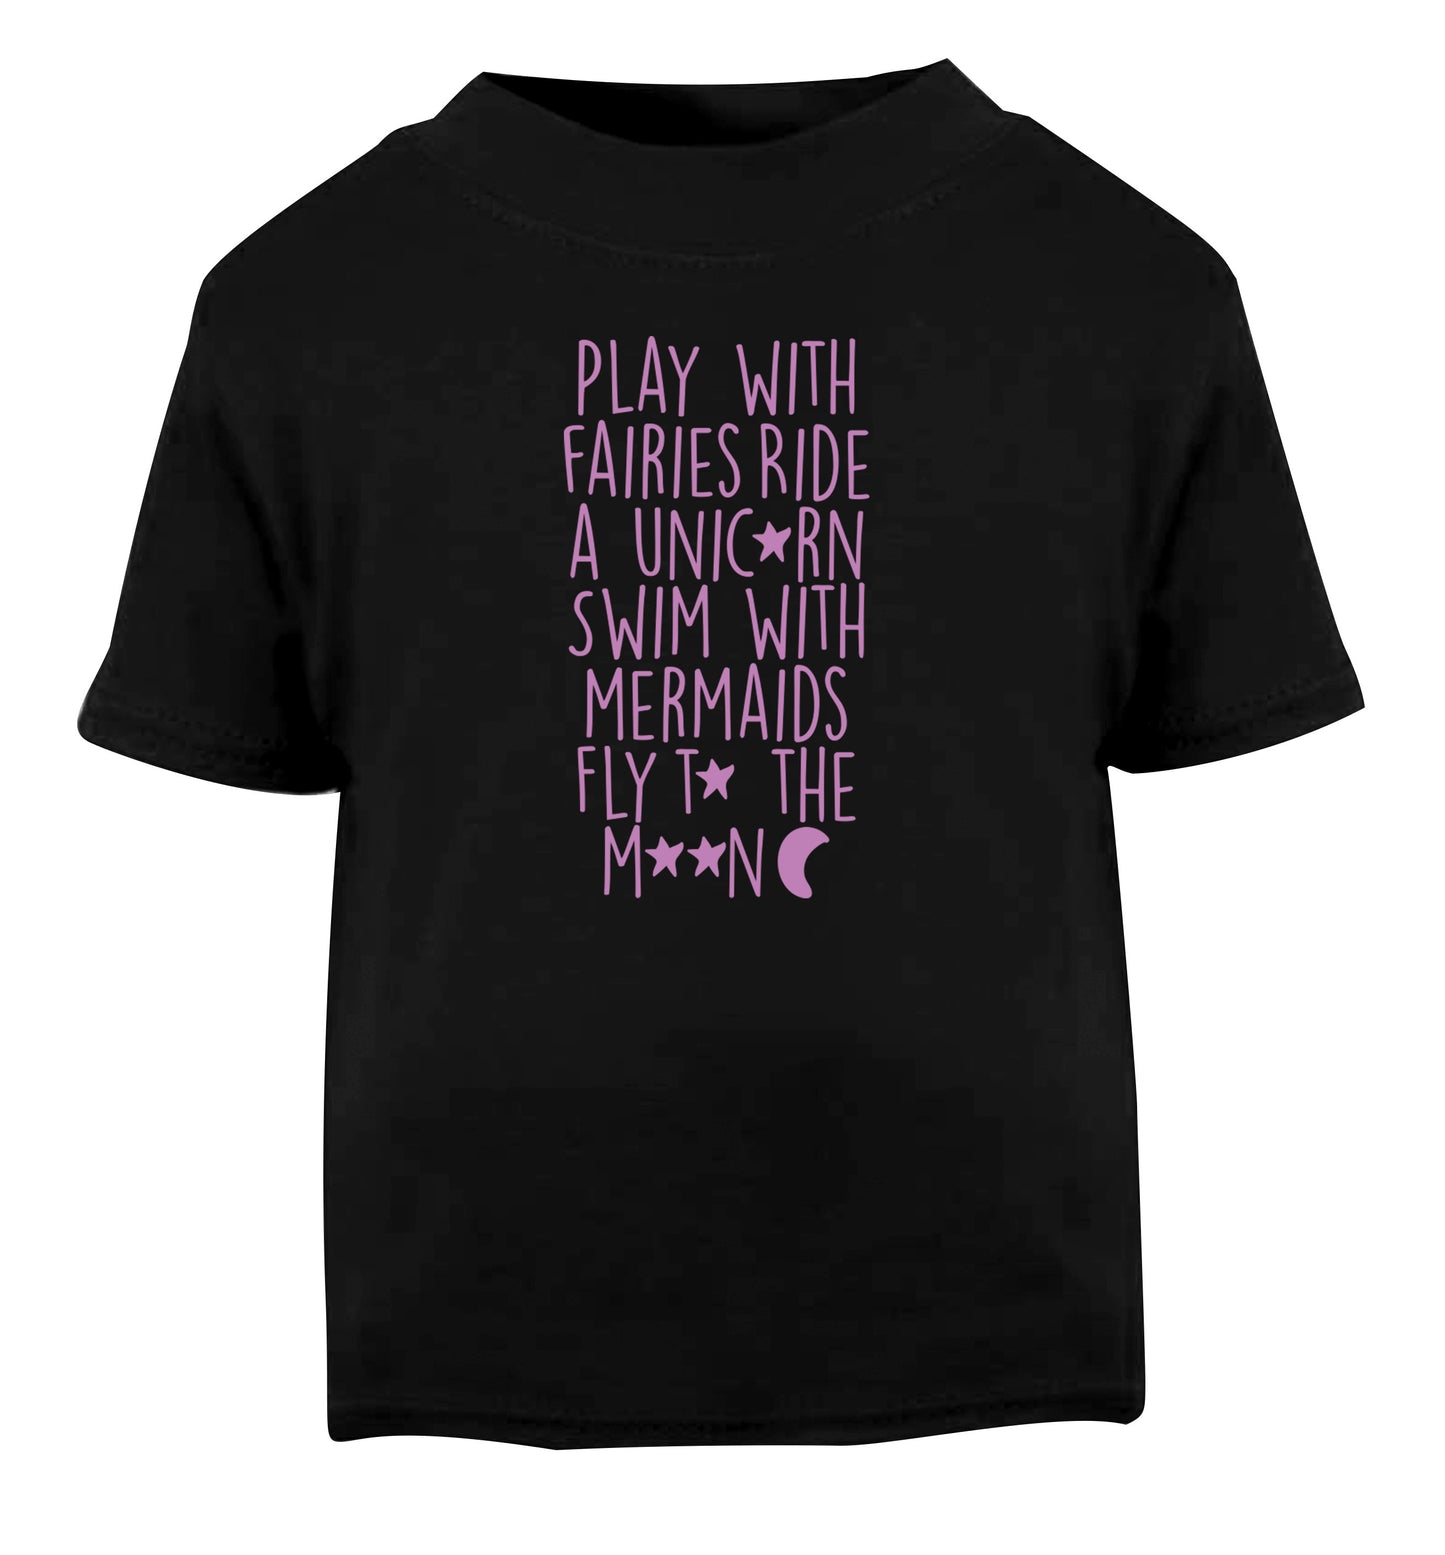 Play with fairies ride a unicorn swim with mermaids fly to the moon Black Baby Toddler Tshirt 2 years